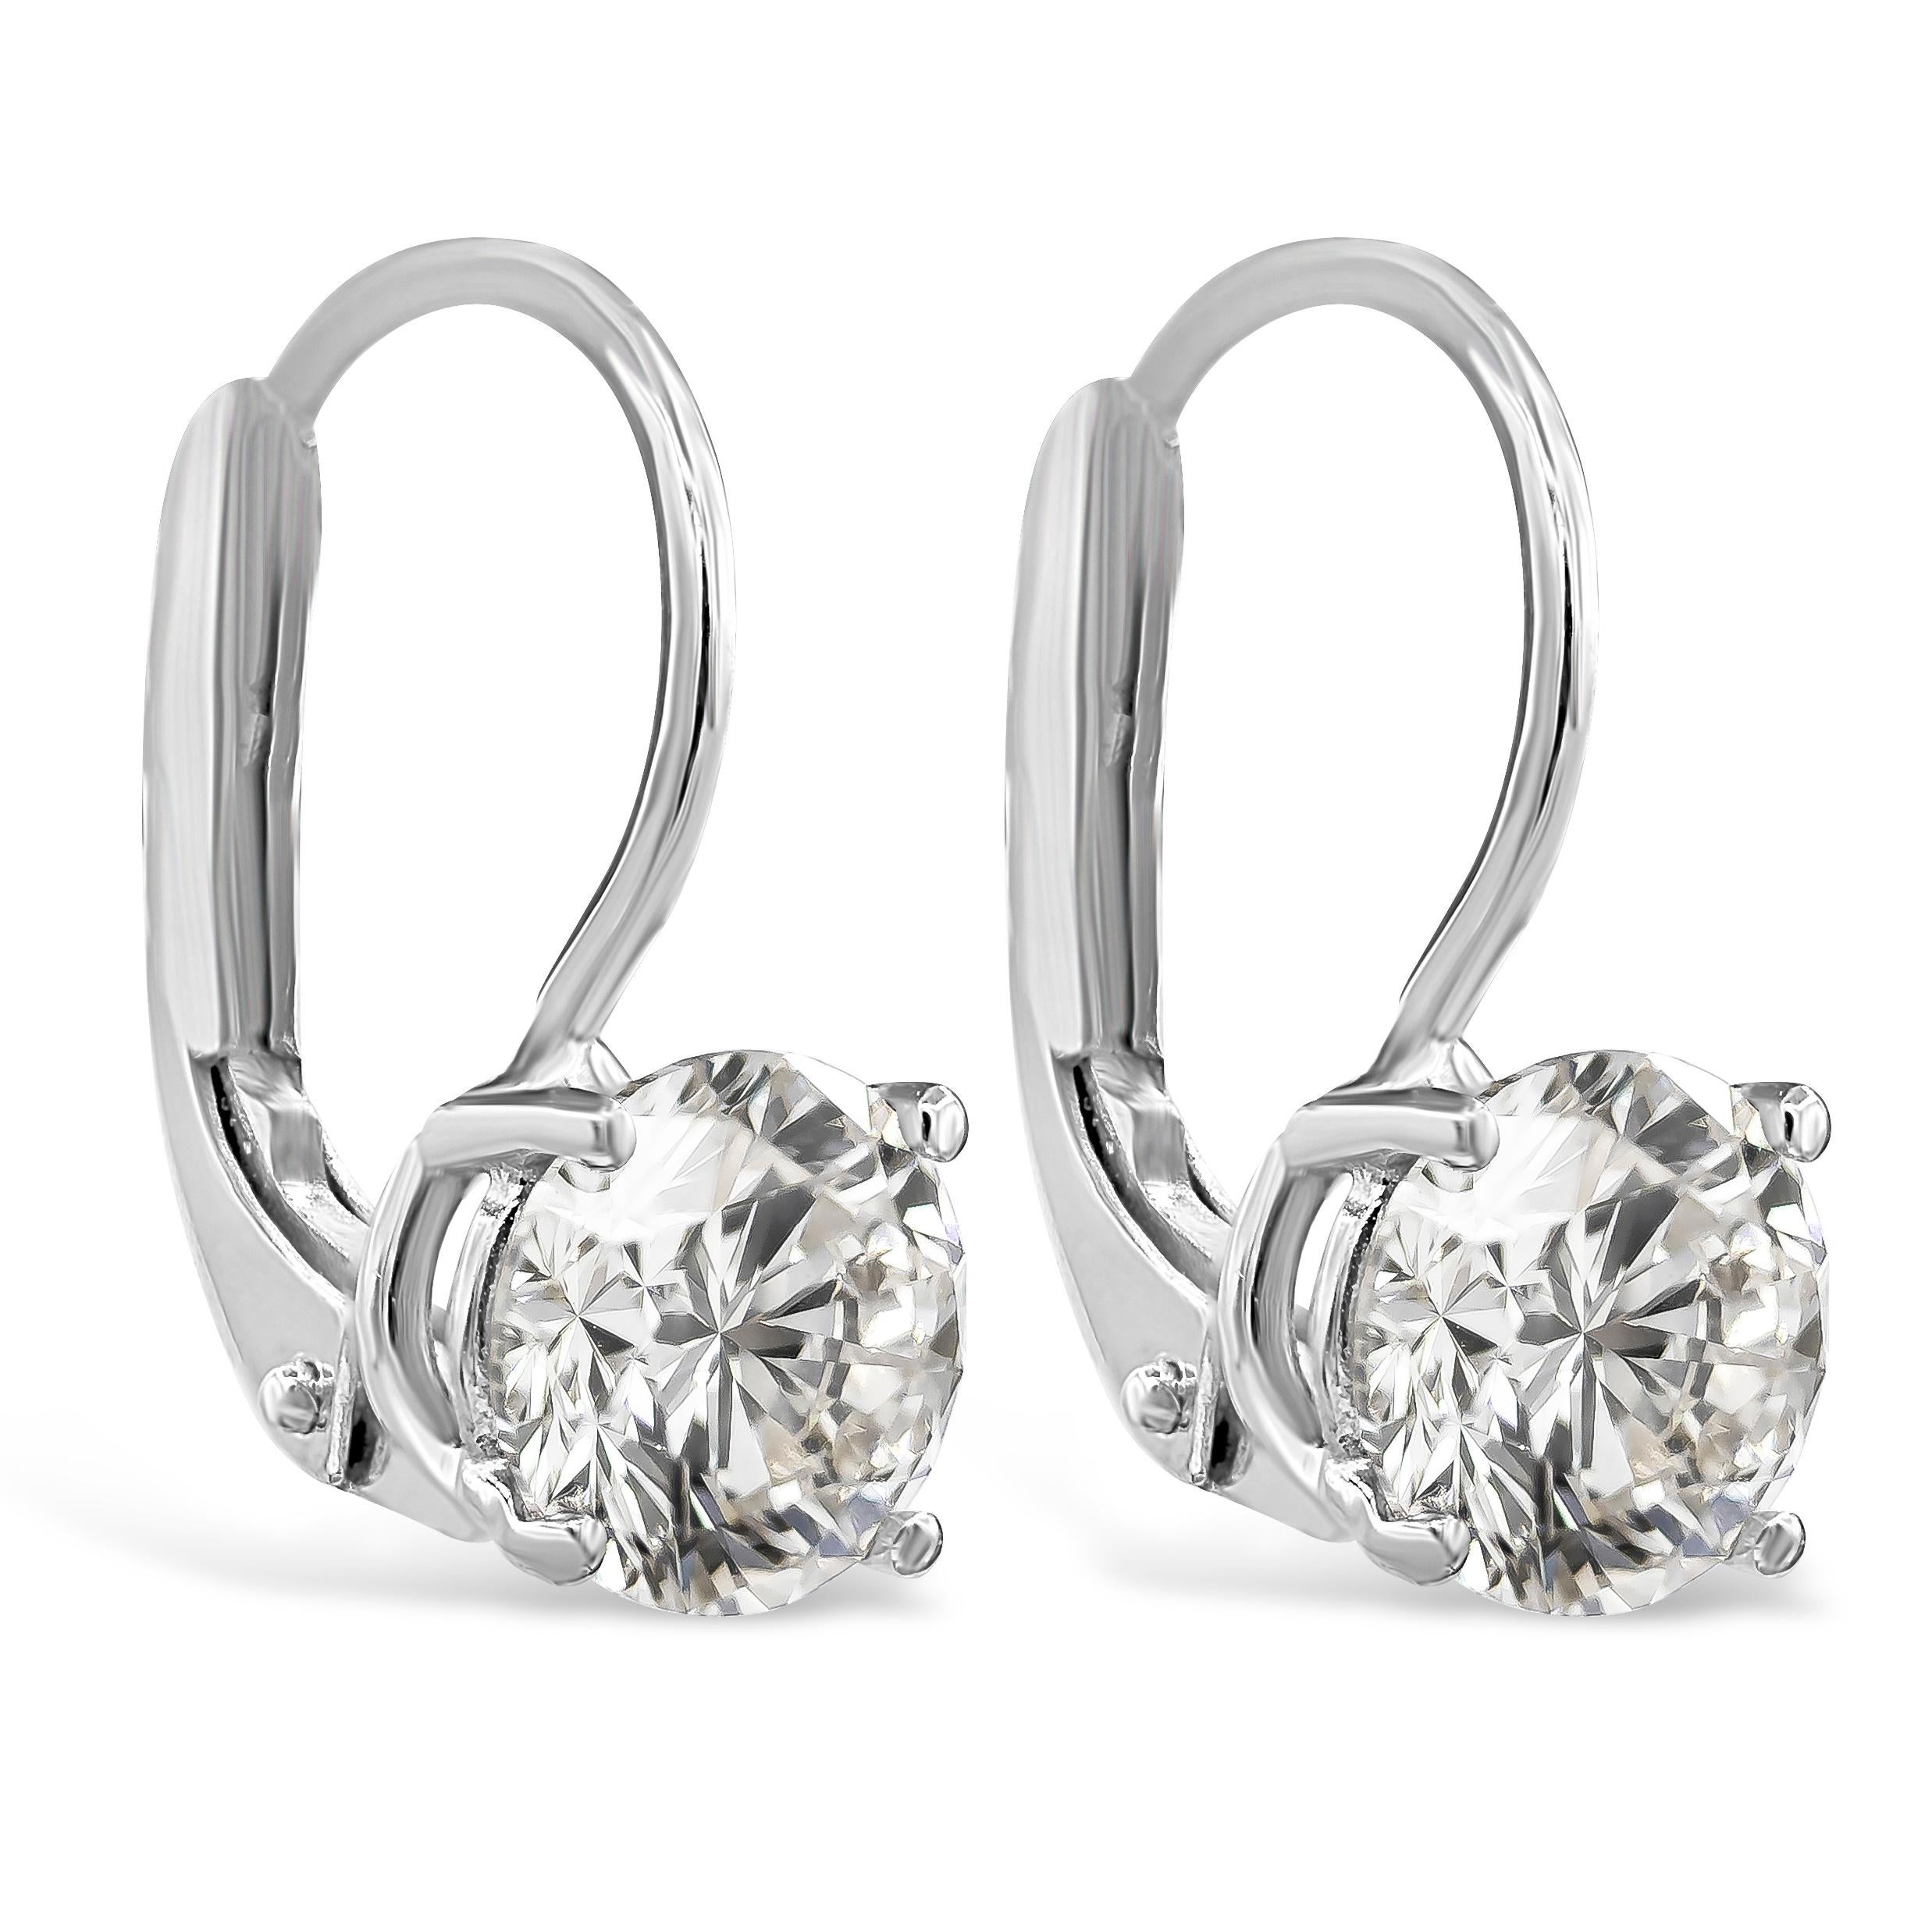 Showcasing a round brilliant diamonds, elegantly set in a lever-back drop setting made in 14k white gold. Set in a four prong basket setting. Diamonds weigh 1.70 carats total and are approximately H color, SI in clarity.

Roman Malakov is a custom